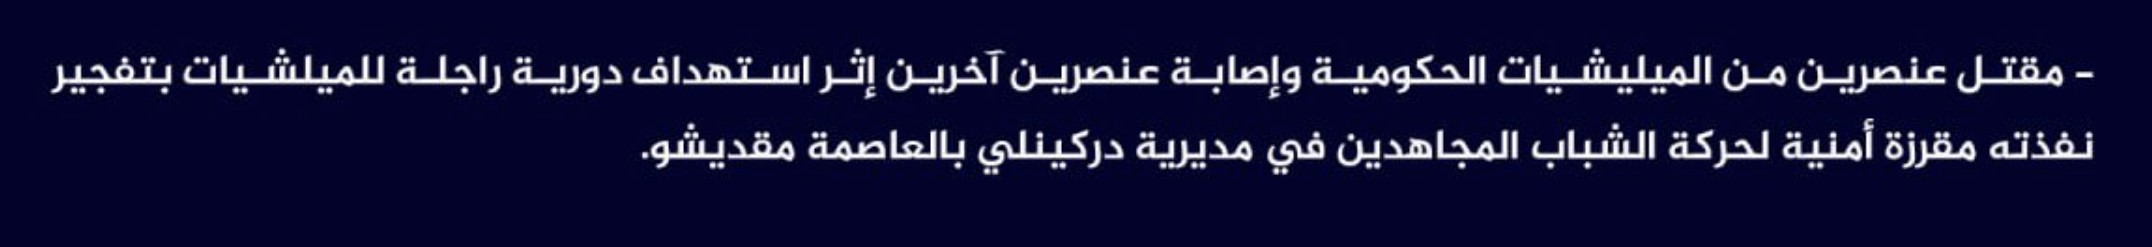 (Claim) al-Shabaab Killed Two Somalian Forces and Injured Two Others in an IED Attack on a Military Patrol in Dharkenley, Mogadishu, Somalia - 12 October 2023